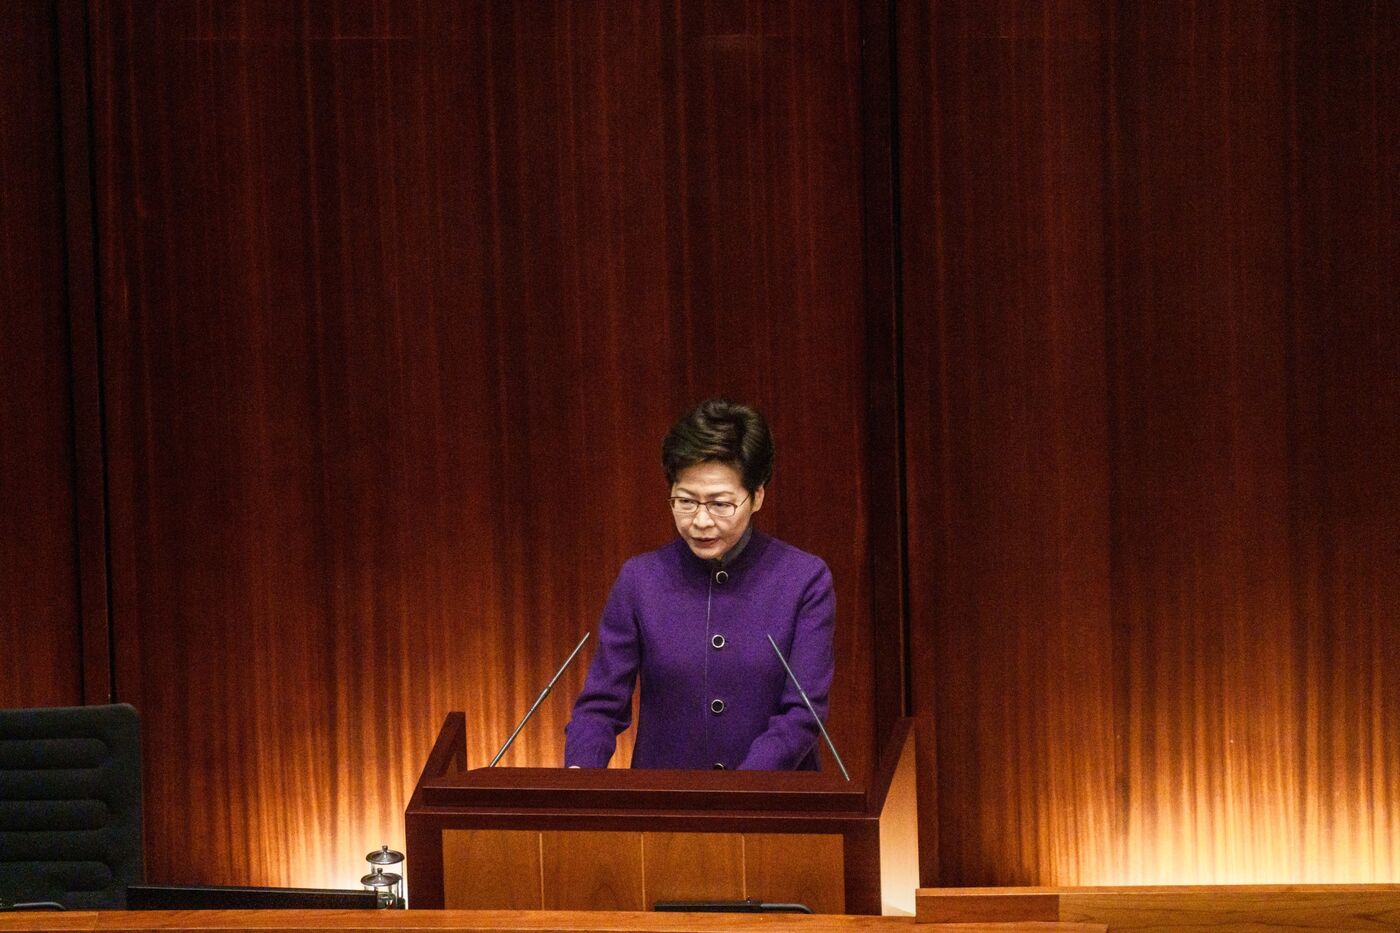 Hong Kong Chief Executive Carrie Lam Attends First Session of the City’s “Patriots-Only” Legislature